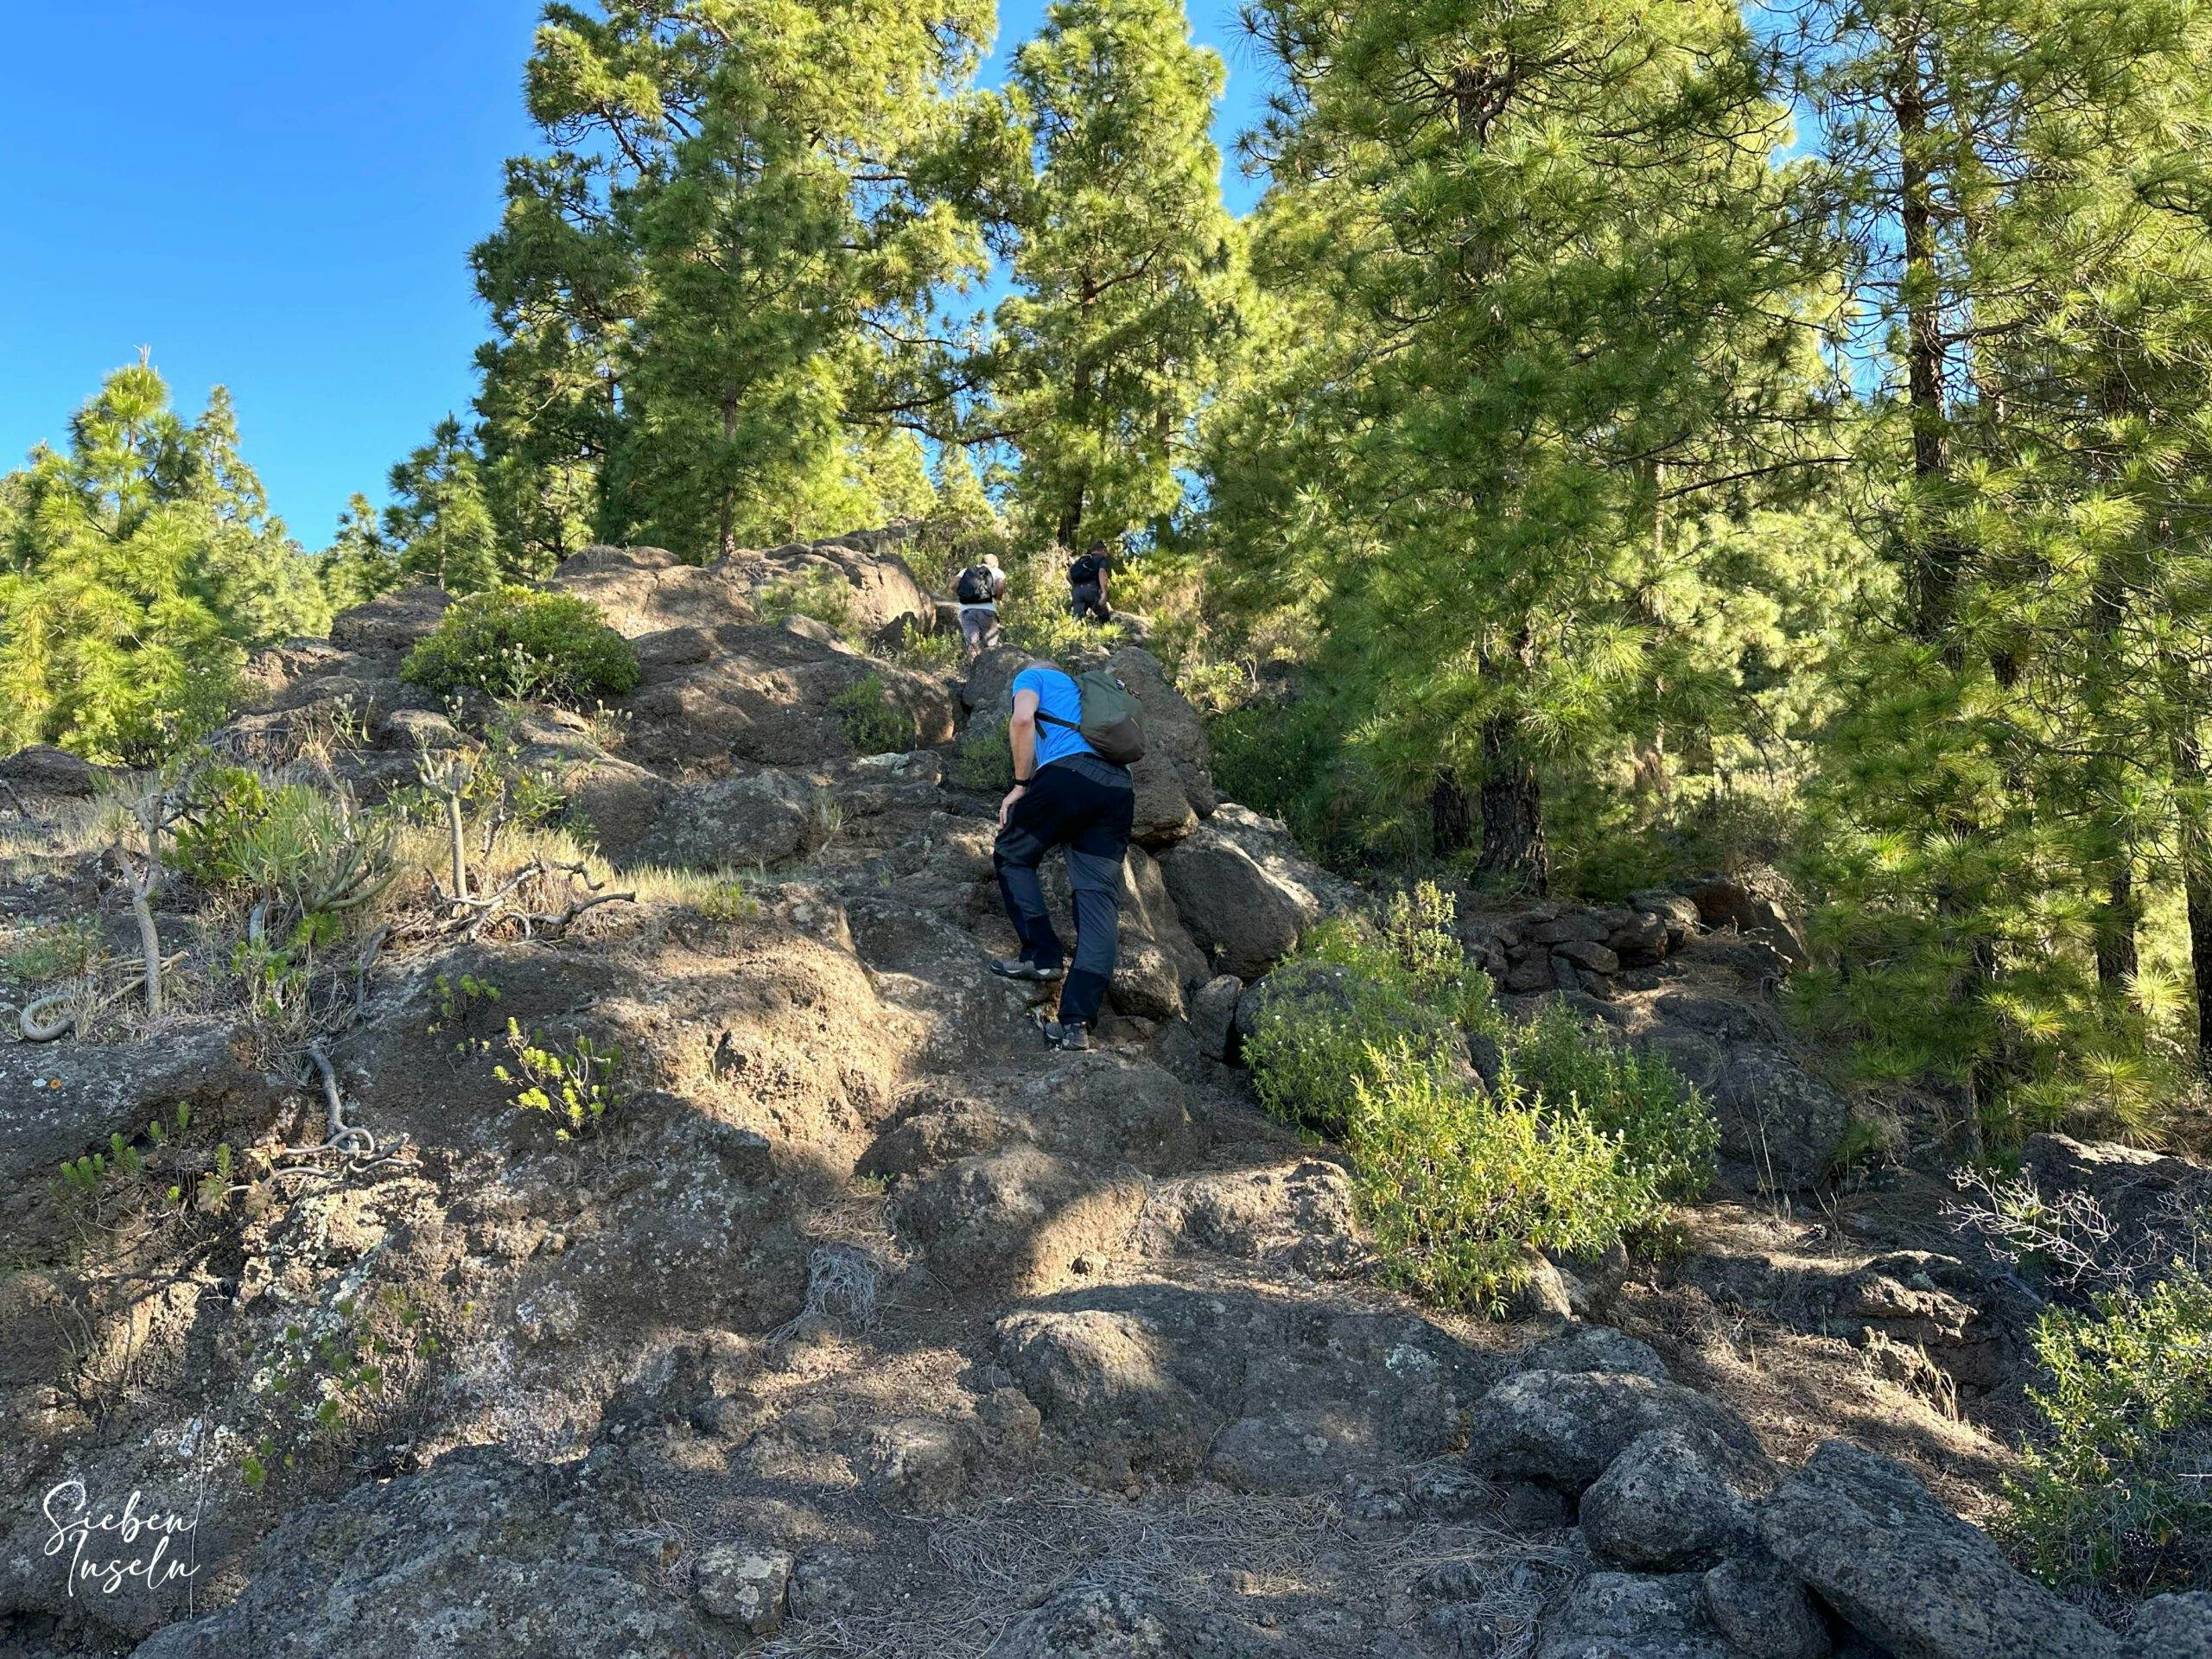 Hiker on the ridge path towards Esperanza forest from the east side of the island